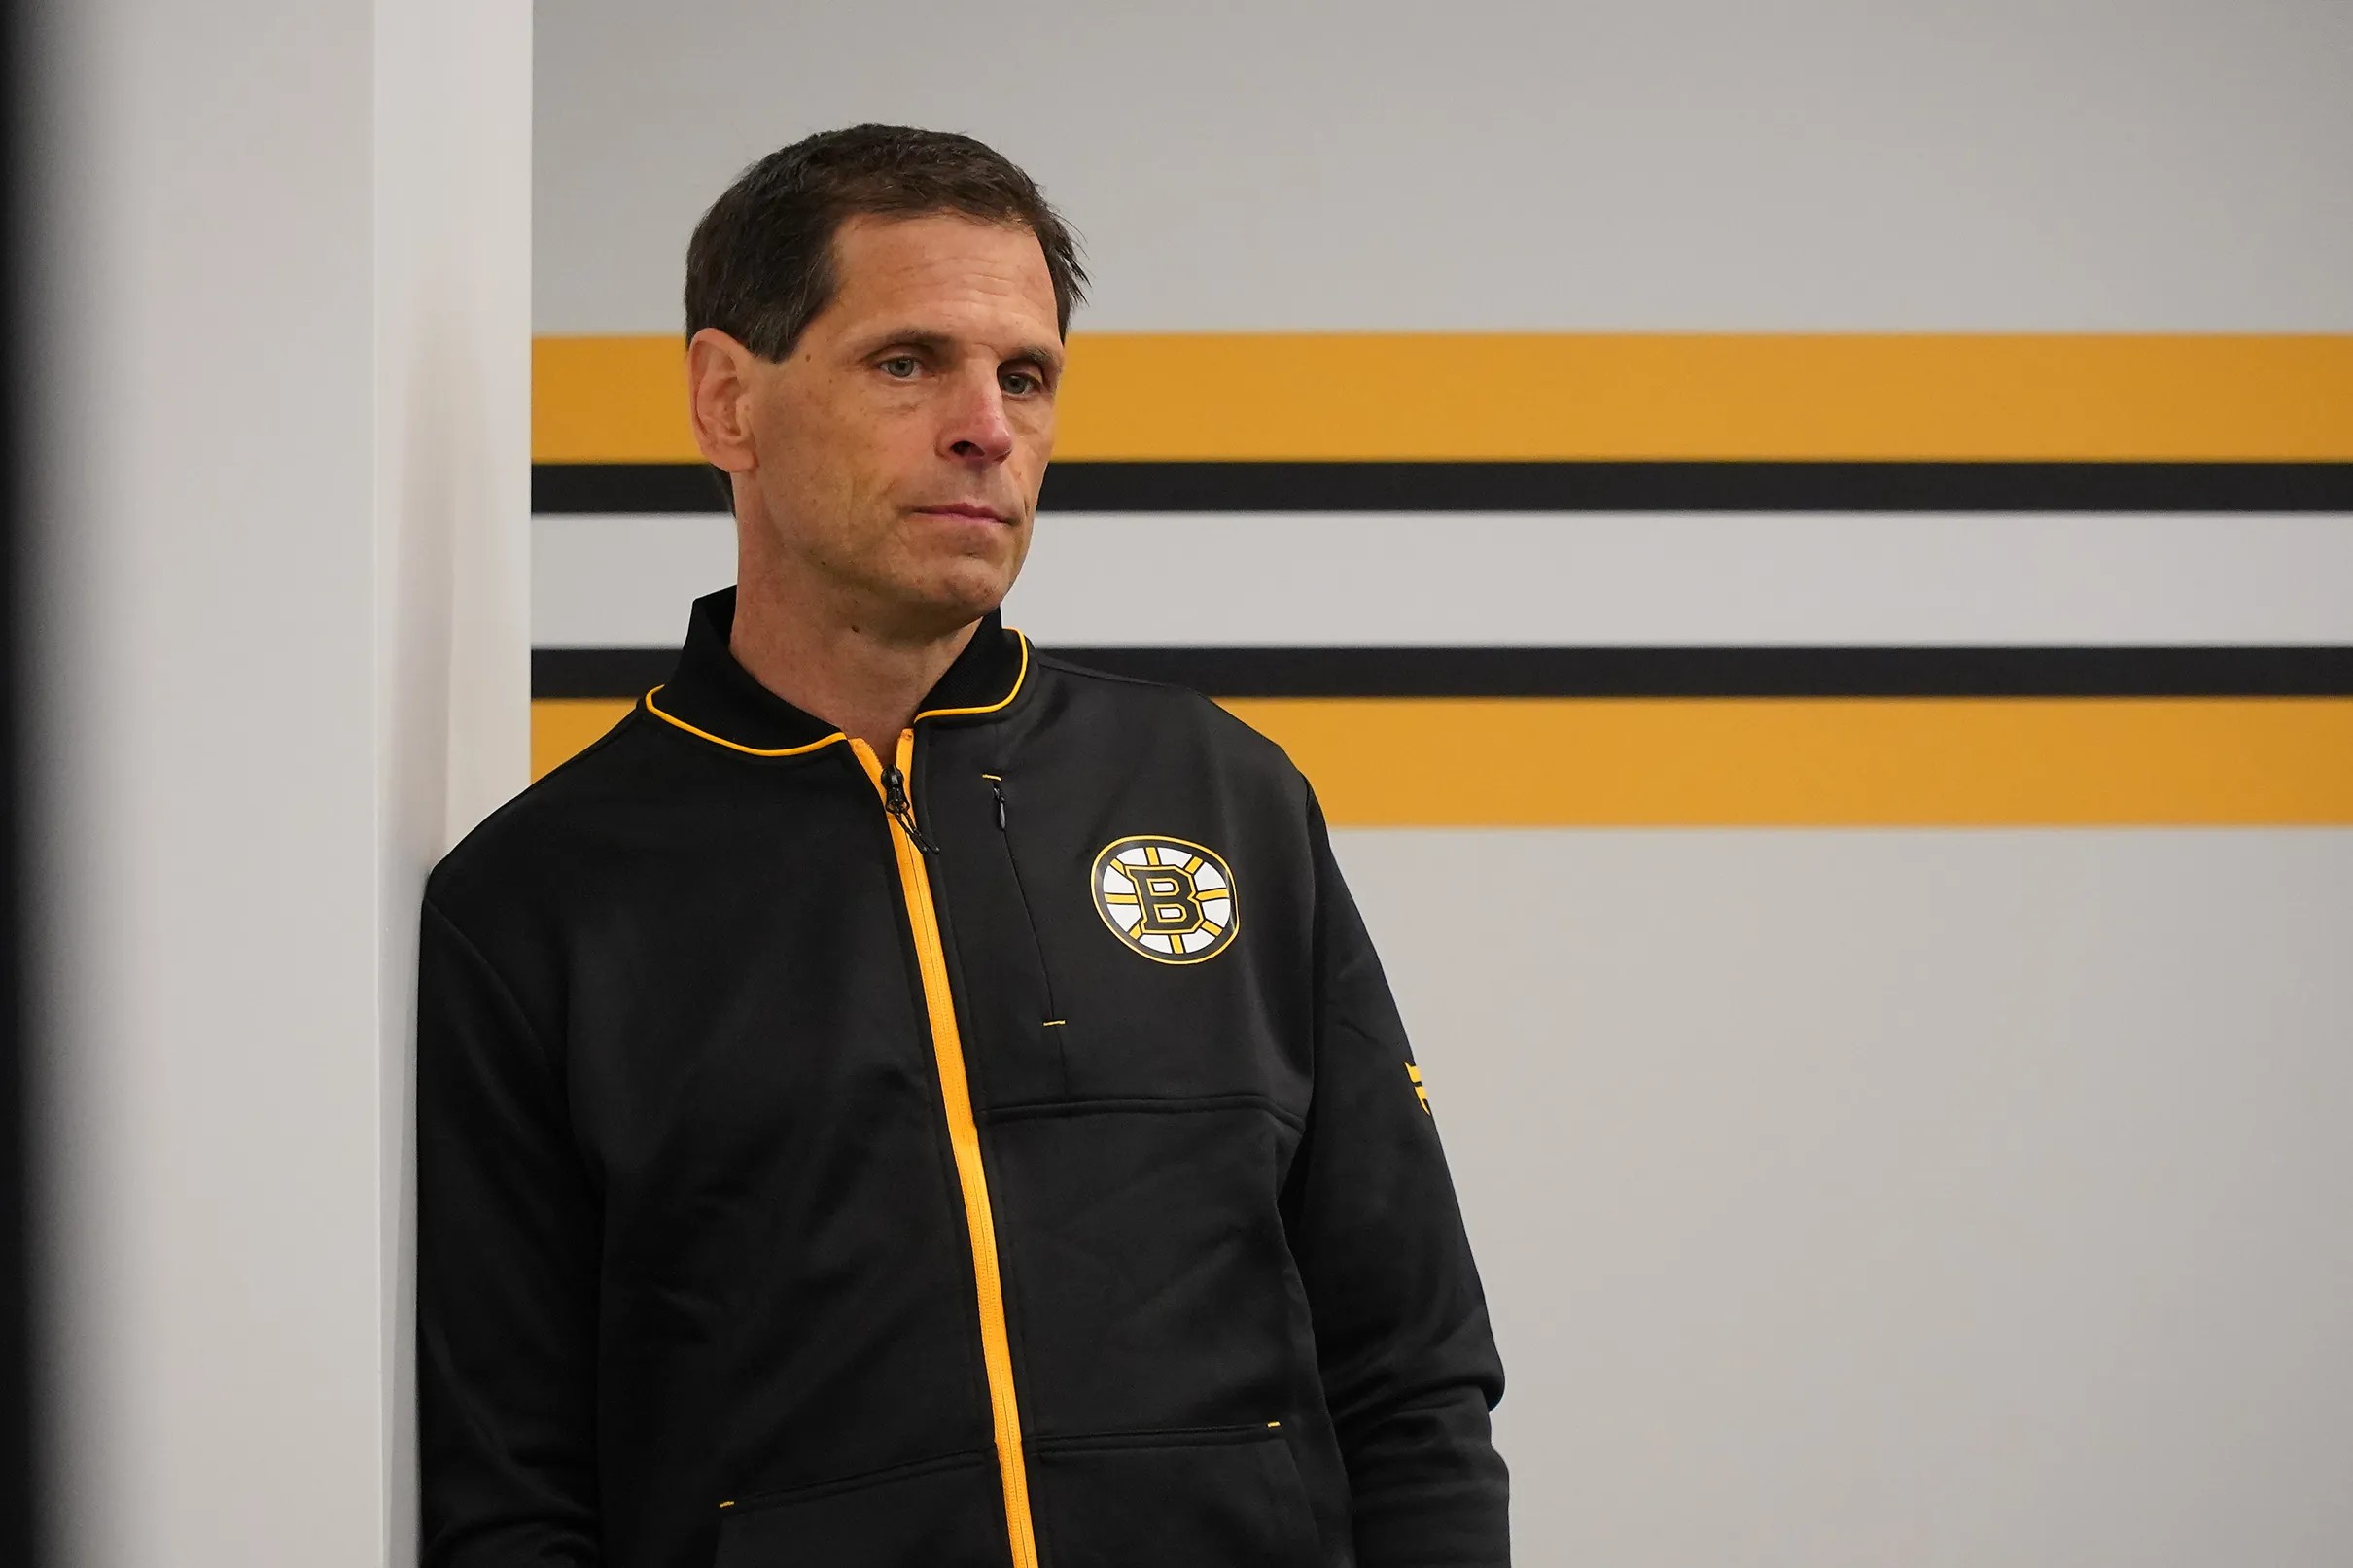 Recapping the 2021 Draft for the Bruins Four forwards, two defensemen